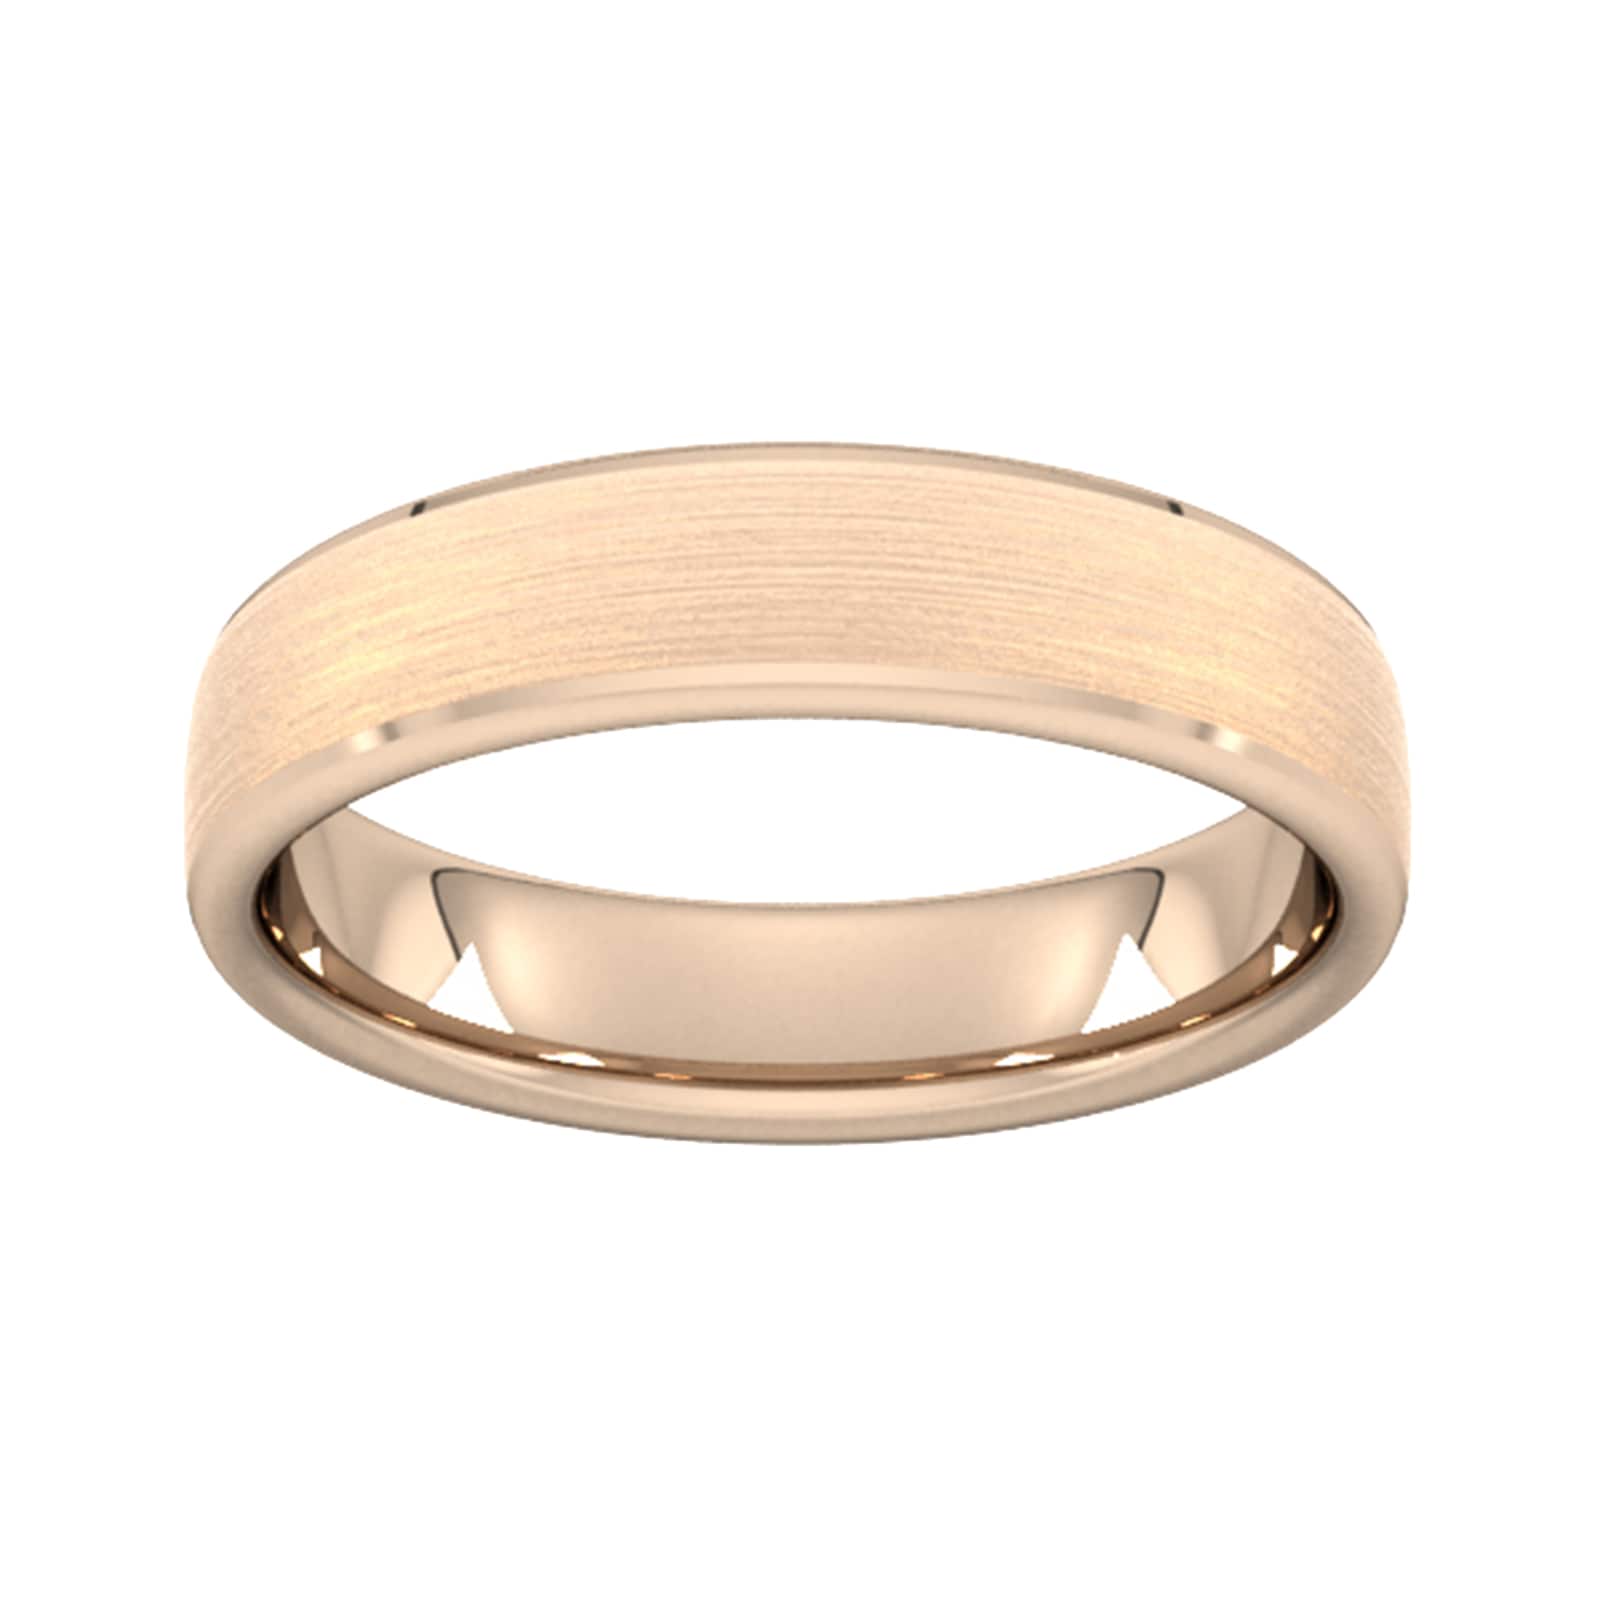 5mm Flat Court Heavy Polished Chamfered Edges With Matt Centre Wedding Ring In 9 Carat Rose Gold - Ring Size U